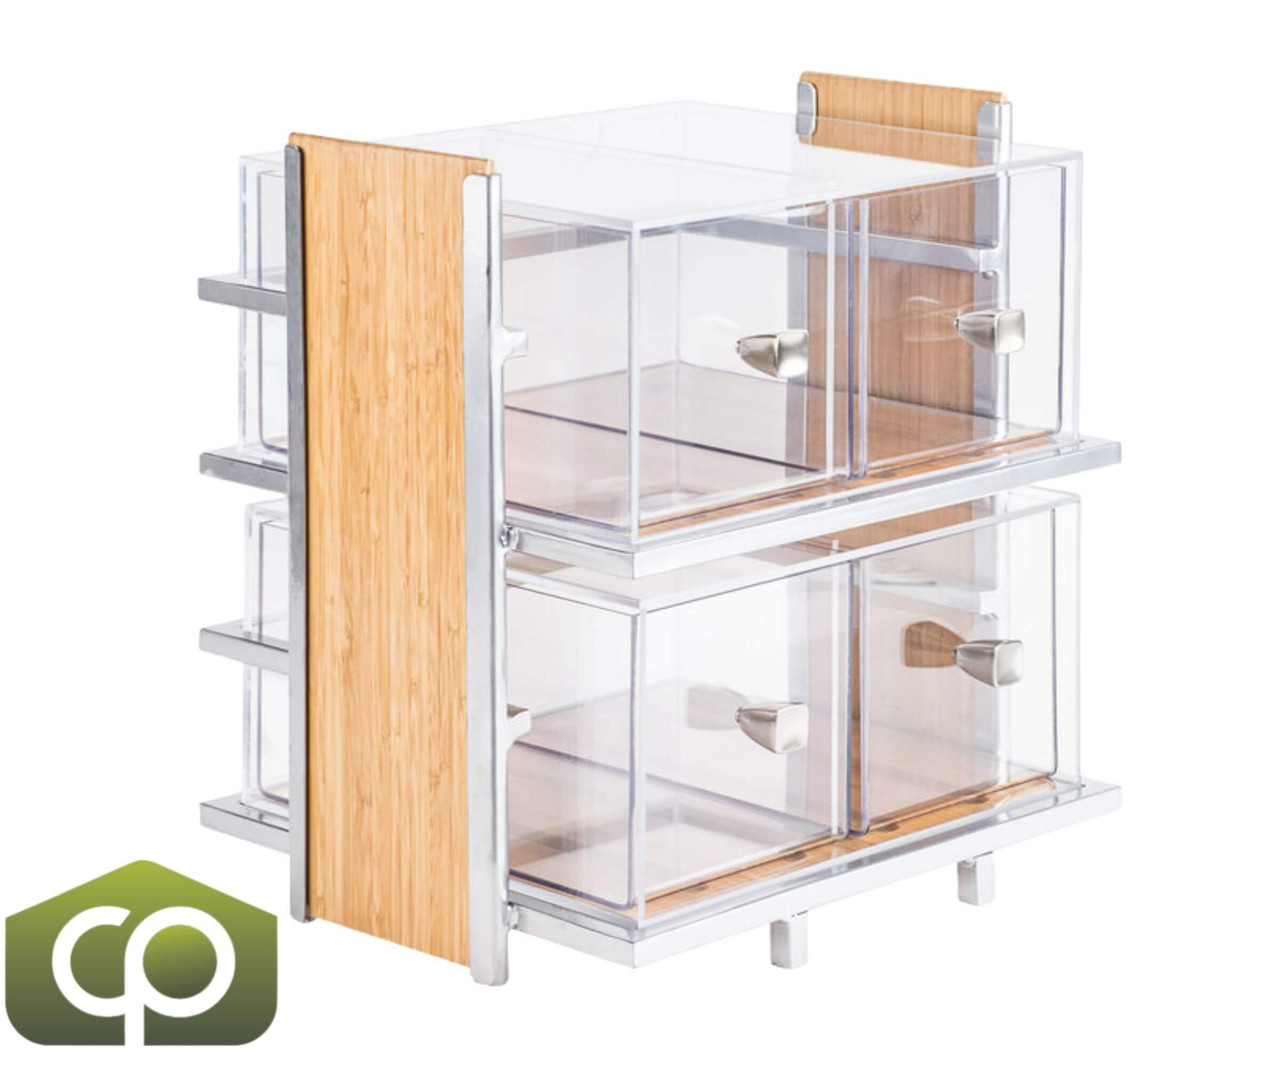 Cal-Mil 14" x 11 1/2" x 15" Eco Modern Two Tier Bread Display Case-Chicken Pieces